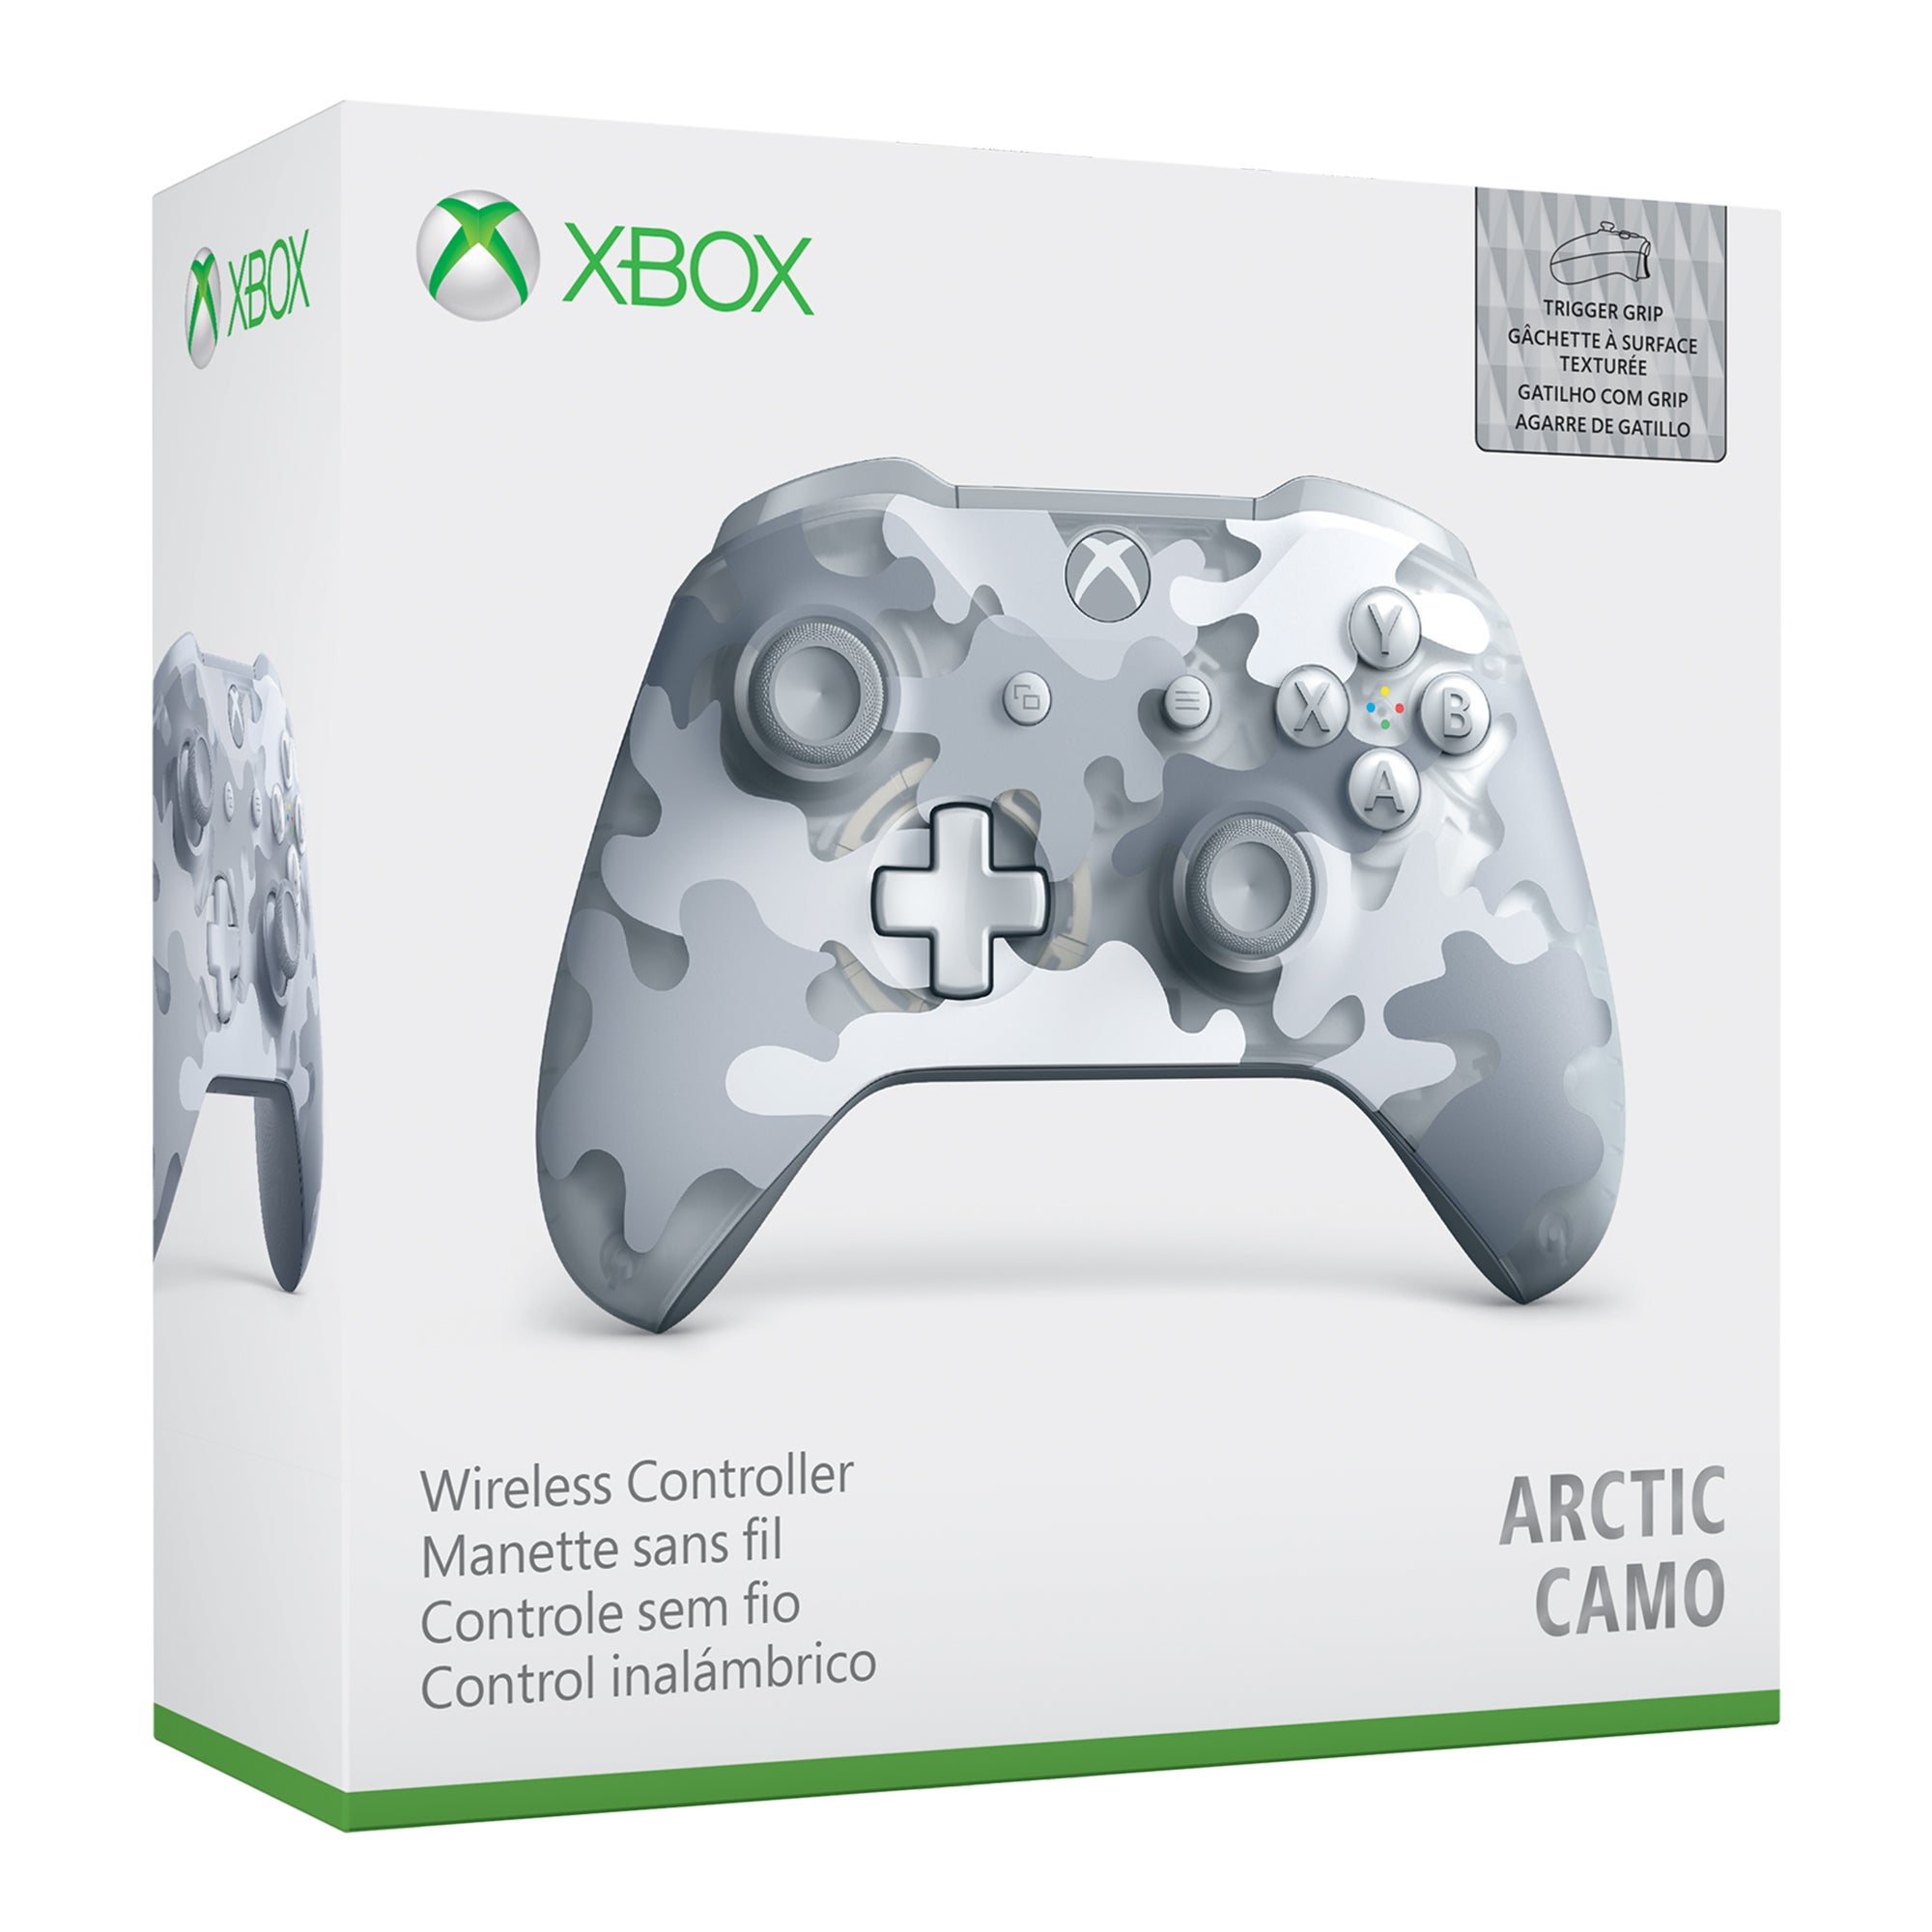 Image for Walmart has a bunch of Xbox controllers selling cheap